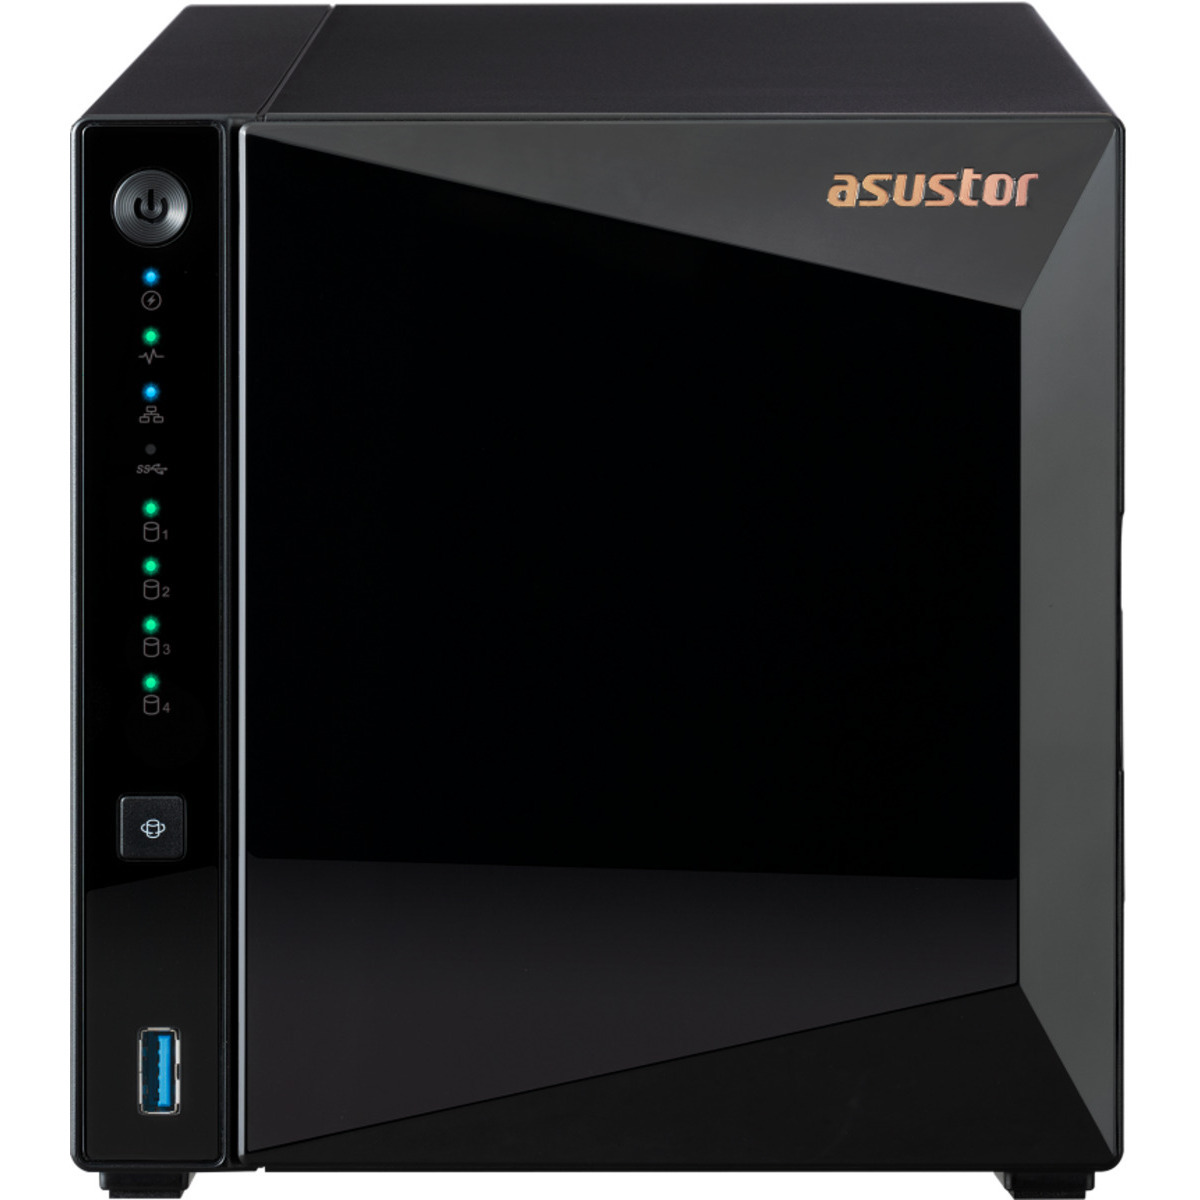 ASUSTOR DRIVESTOR 4 Pro AS3304T 64tb 4-Bay Desktop Personal / Basic Home / Small Office NAS - Network Attached Storage Device 4x16tb Seagate EXOS X18 ST16000NM000J 3.5 7200rpm SATA 6Gb/s HDD ENTERPRISE Class Drives Installed - Burn-In Tested DRIVESTOR 4 Pro AS3304T